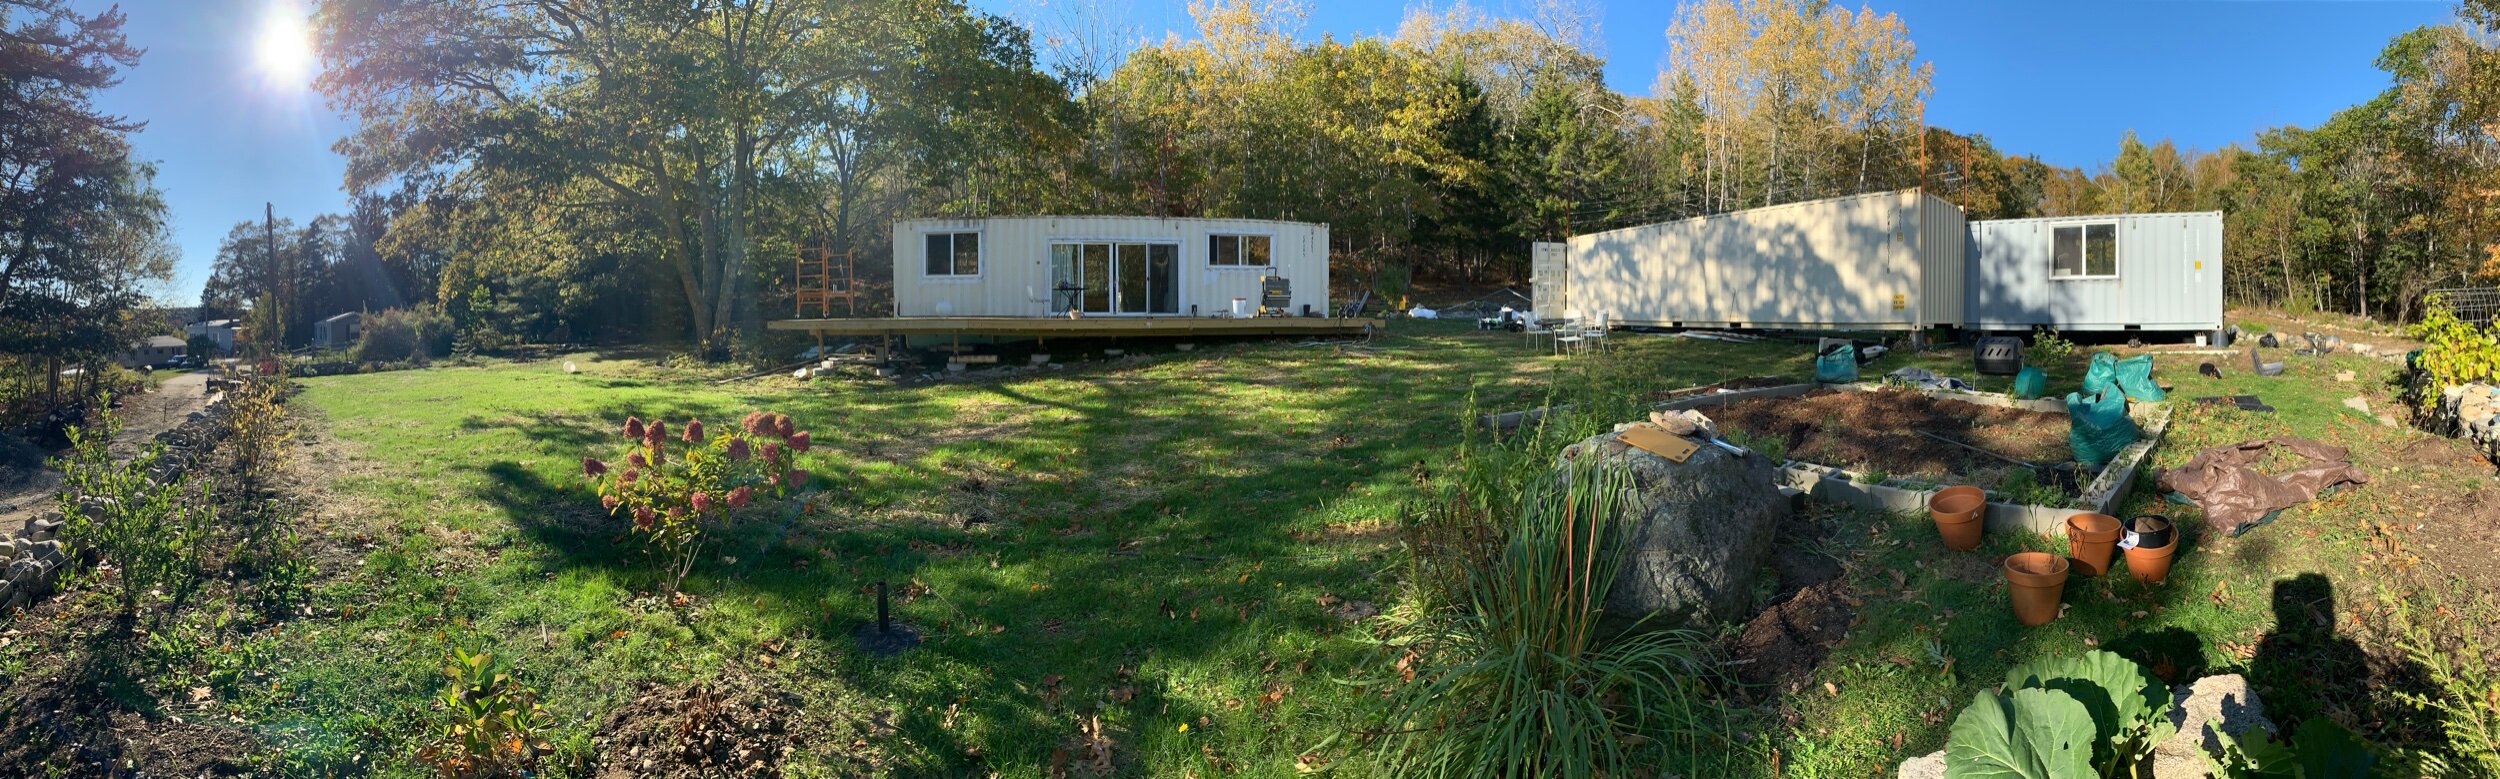 Our eco shipping container home in Bucks Harbor